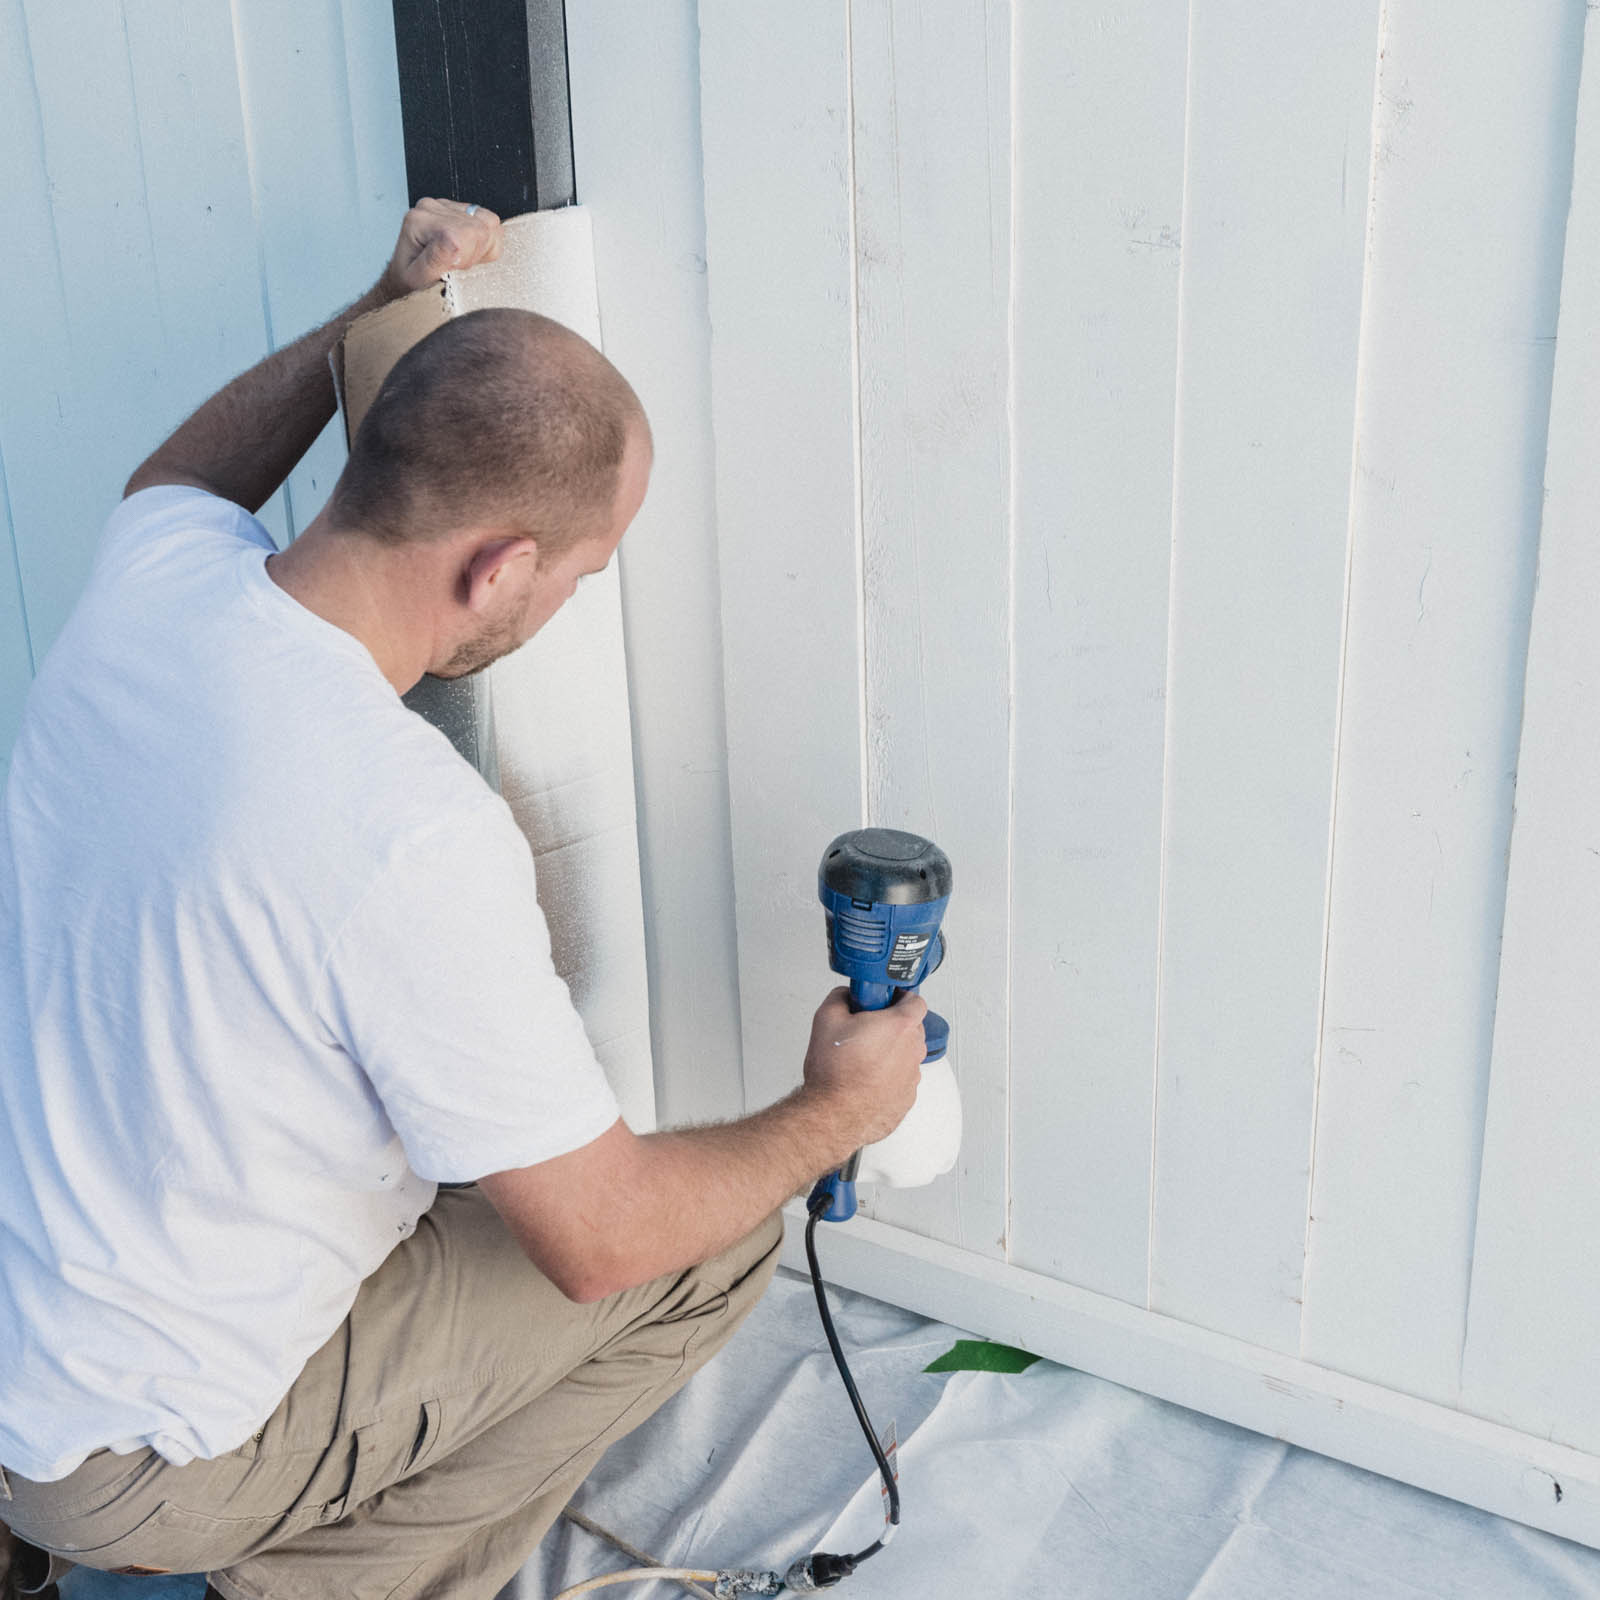 Showing how to paint a wood fence with a paint sprayer